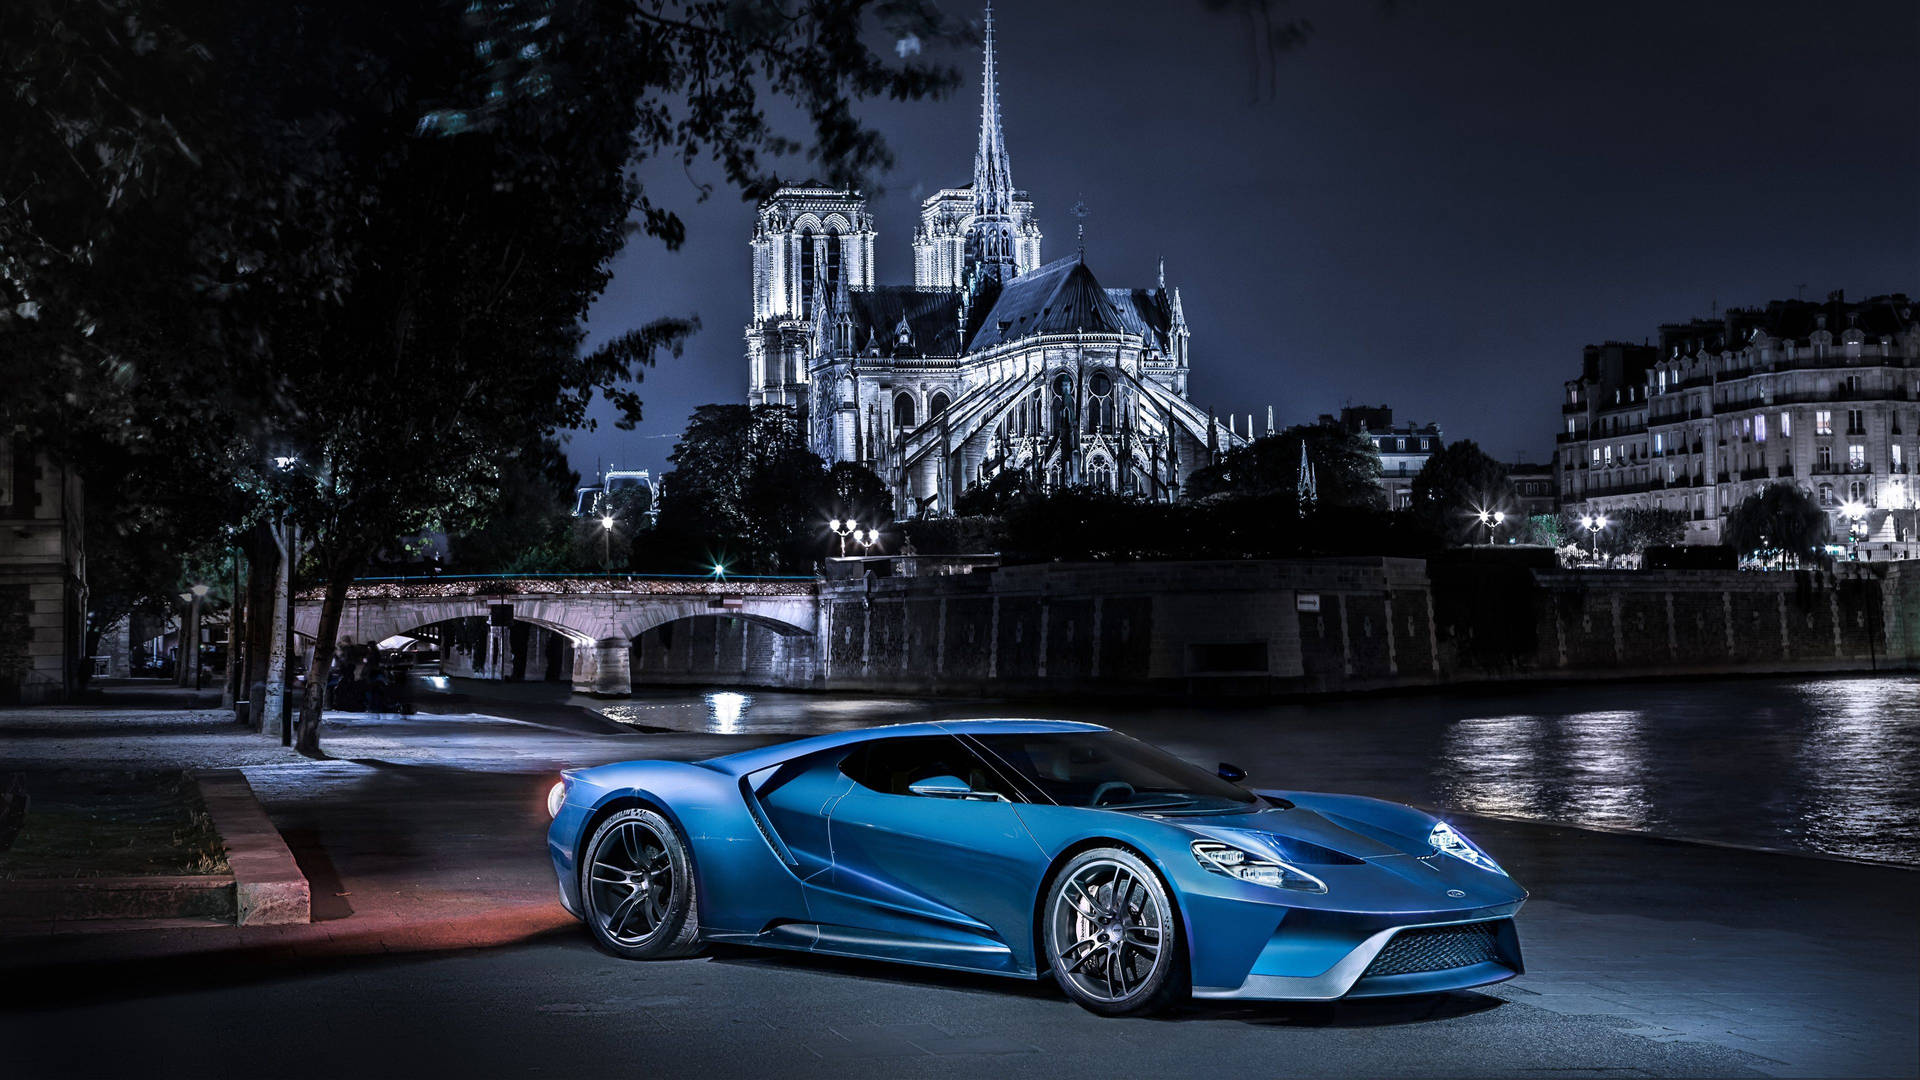 Caption: Majestic Blue Ford Gt Supercar In Its Stunning Glory Background